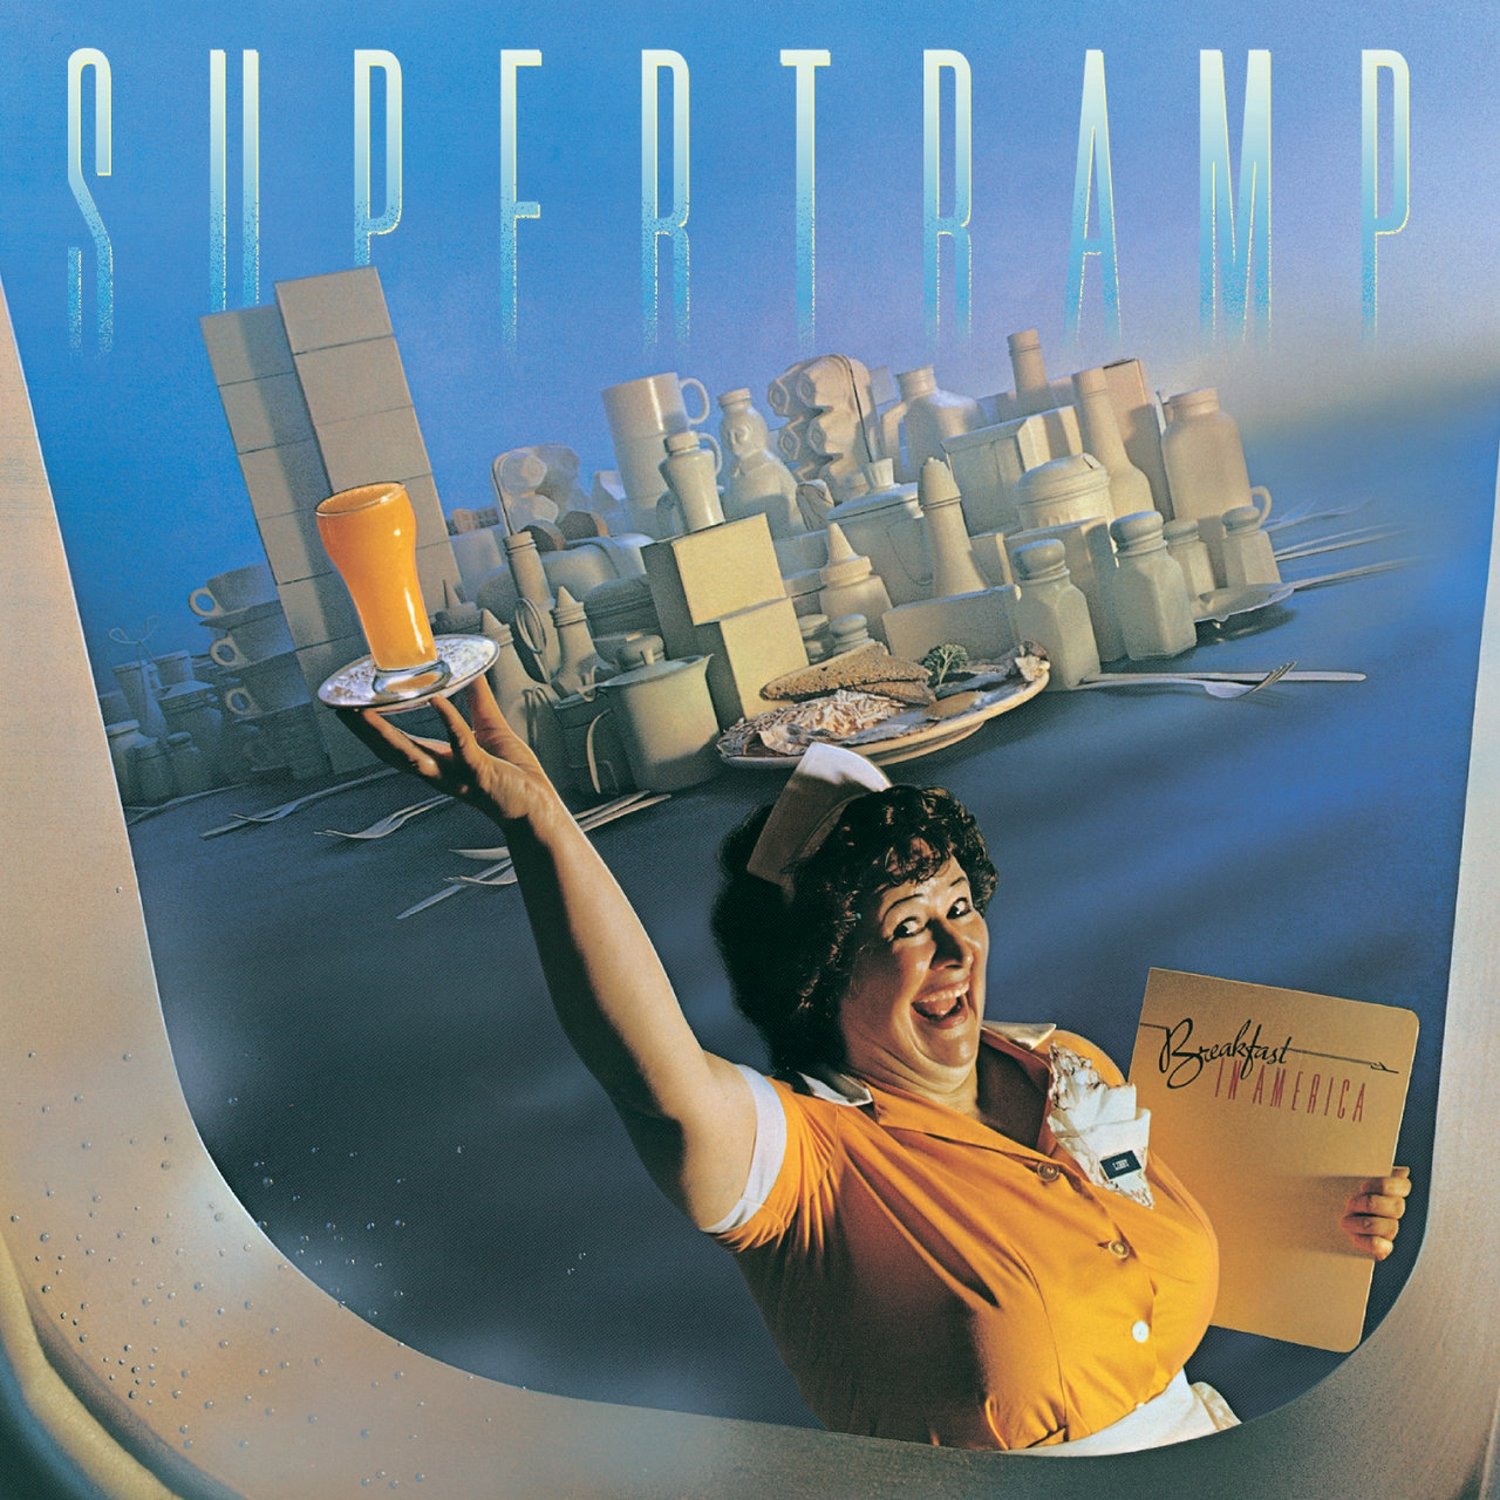 Supertramp-Breakfast In America-Remastered Deluxe Edition-2CD-FLAC-2010-ERP